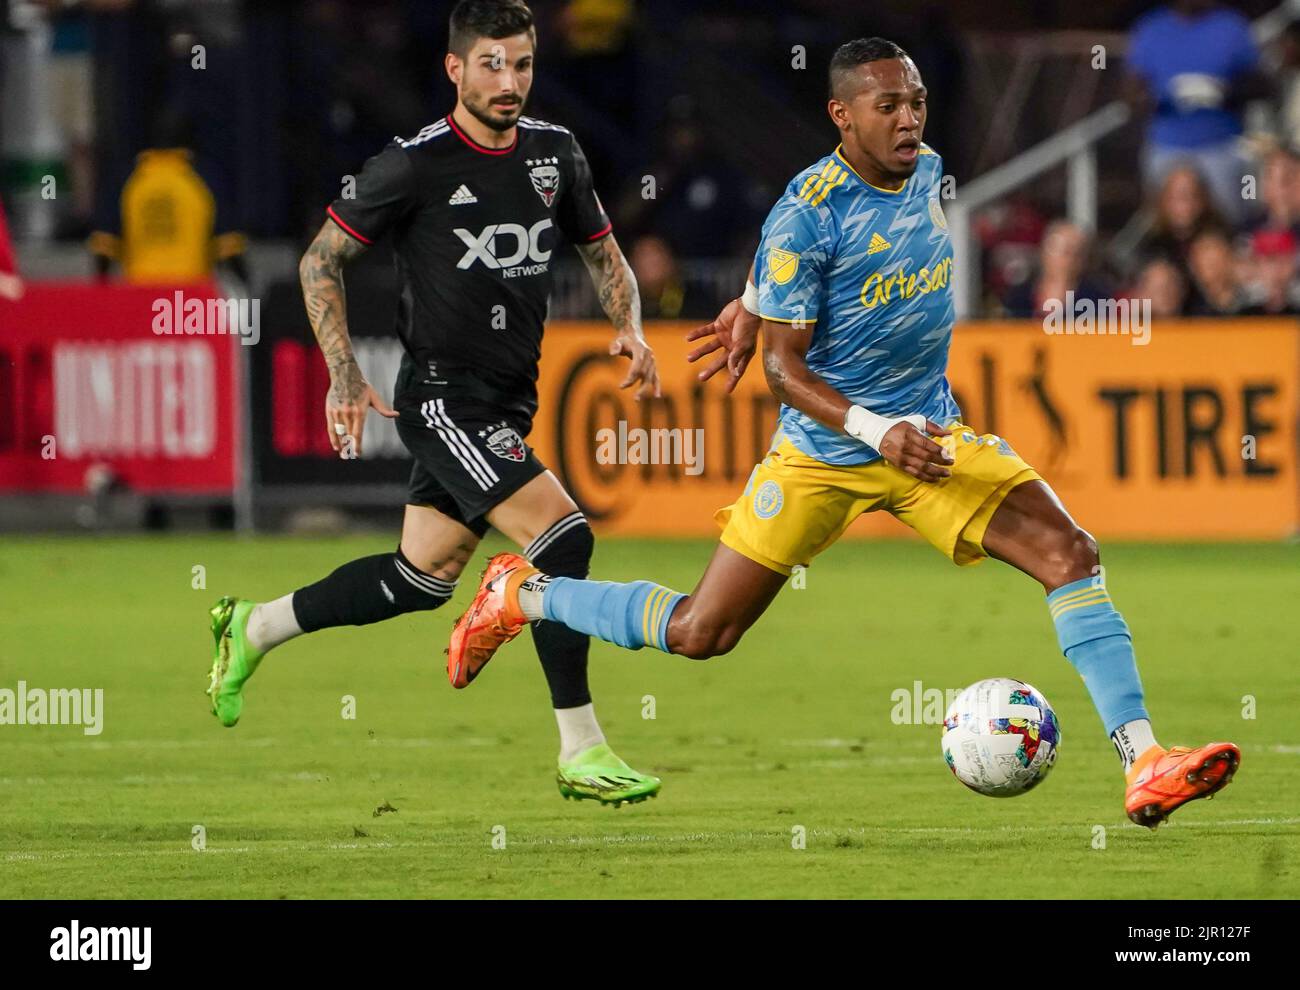 WASHINGTON, DC, USA - 20 AUGUST 2022: Philadelphia Union midfielder José Andrés Martínez (8) moves up on D.C. United forward Taxiarchis Fountas (11) during a MLS match between D.C United and the Philadelphia Union on August 20, 2022, at Audi Field, in Washington, DC. (Photo by Tony Quinn-Alamy Live News) Stock Photo